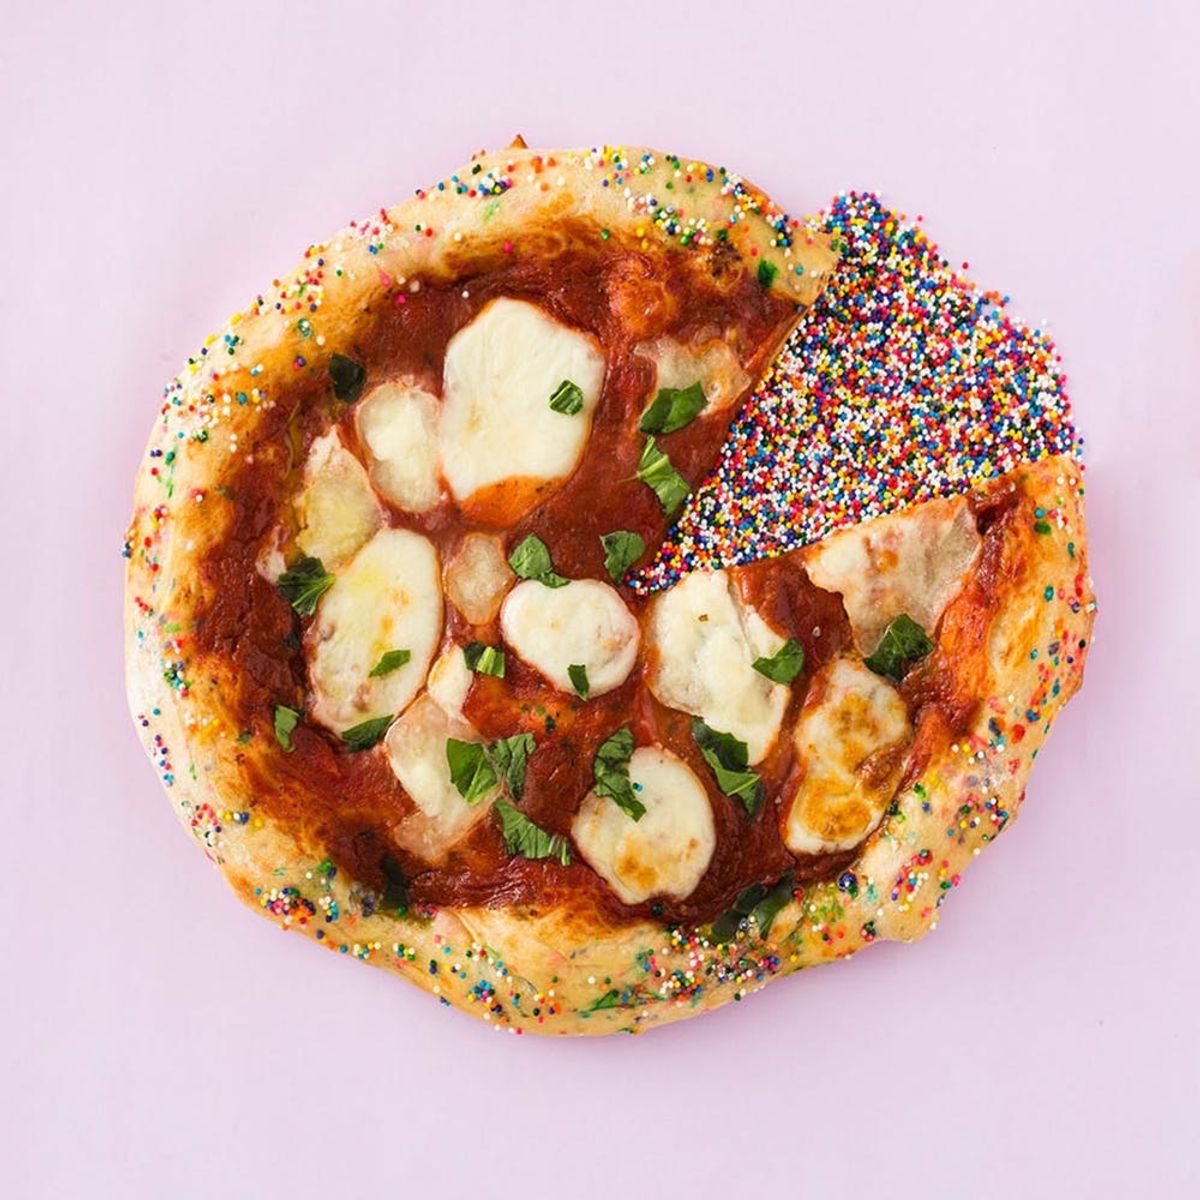 Give Pizza Night a Quirky Twist With a Funfetti Crust